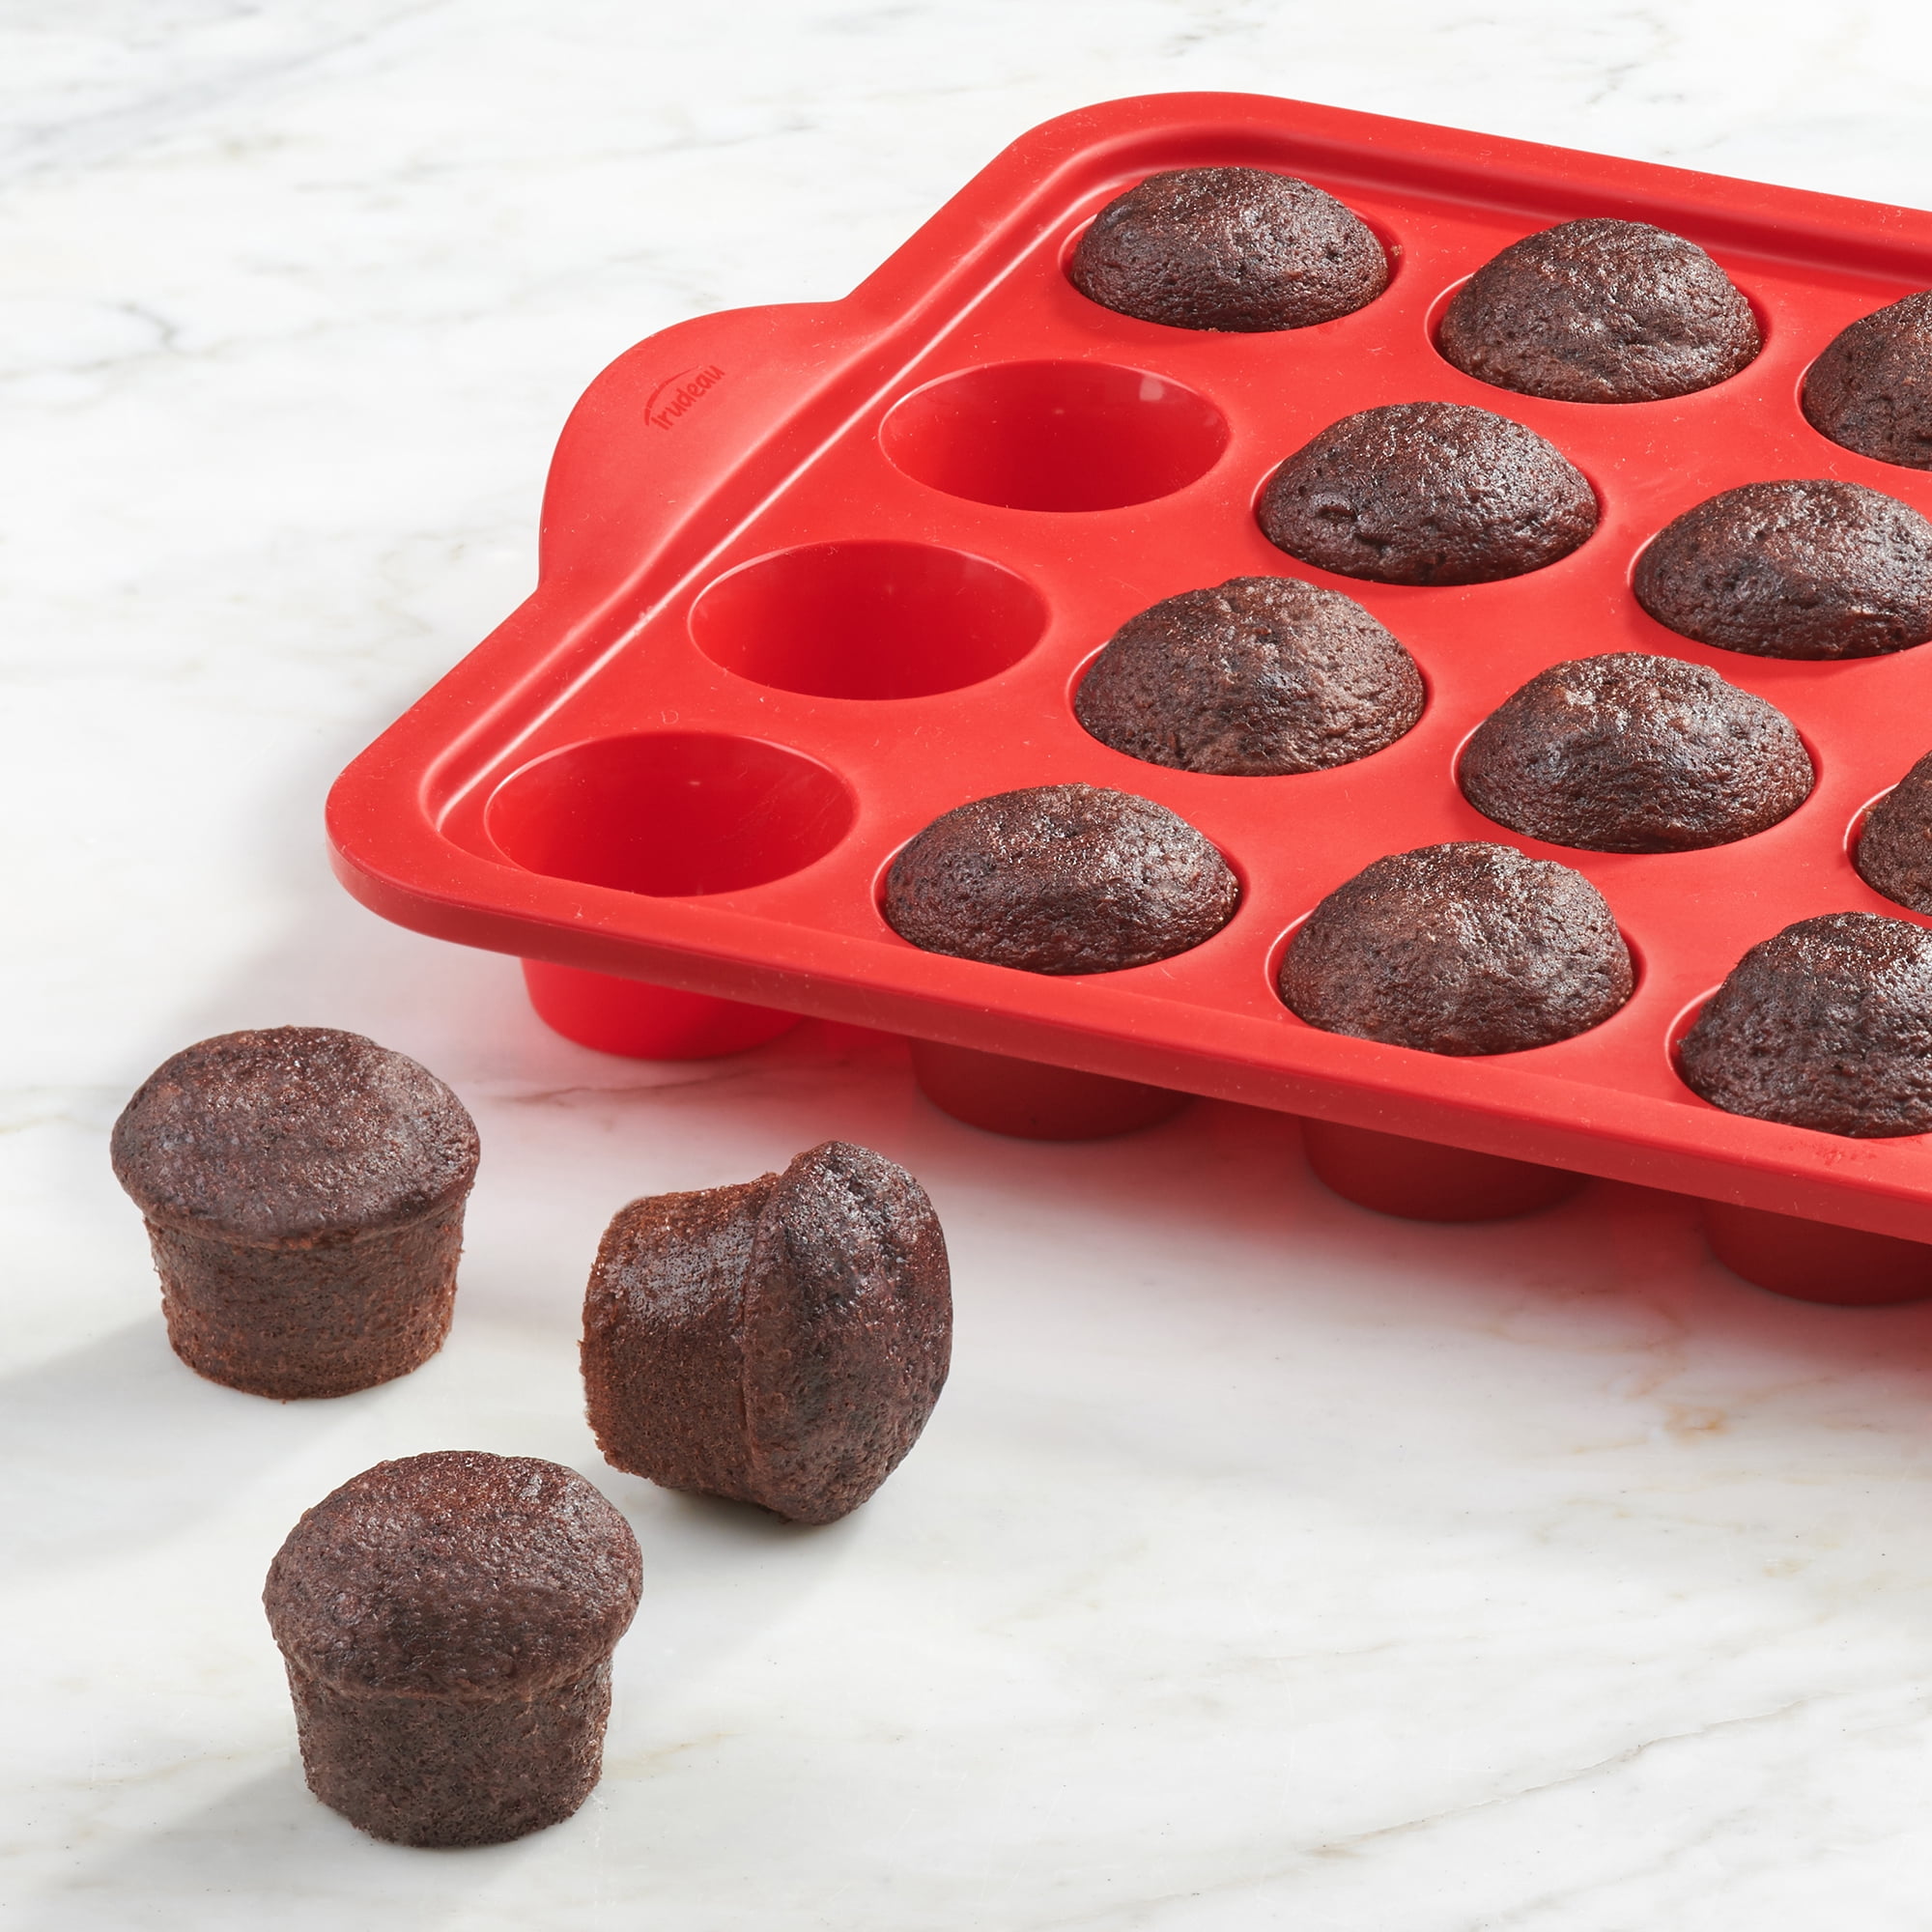 Trudeau® 12 Cup Muffin Pan - Black/Mint, 1 ct - Foods Co.